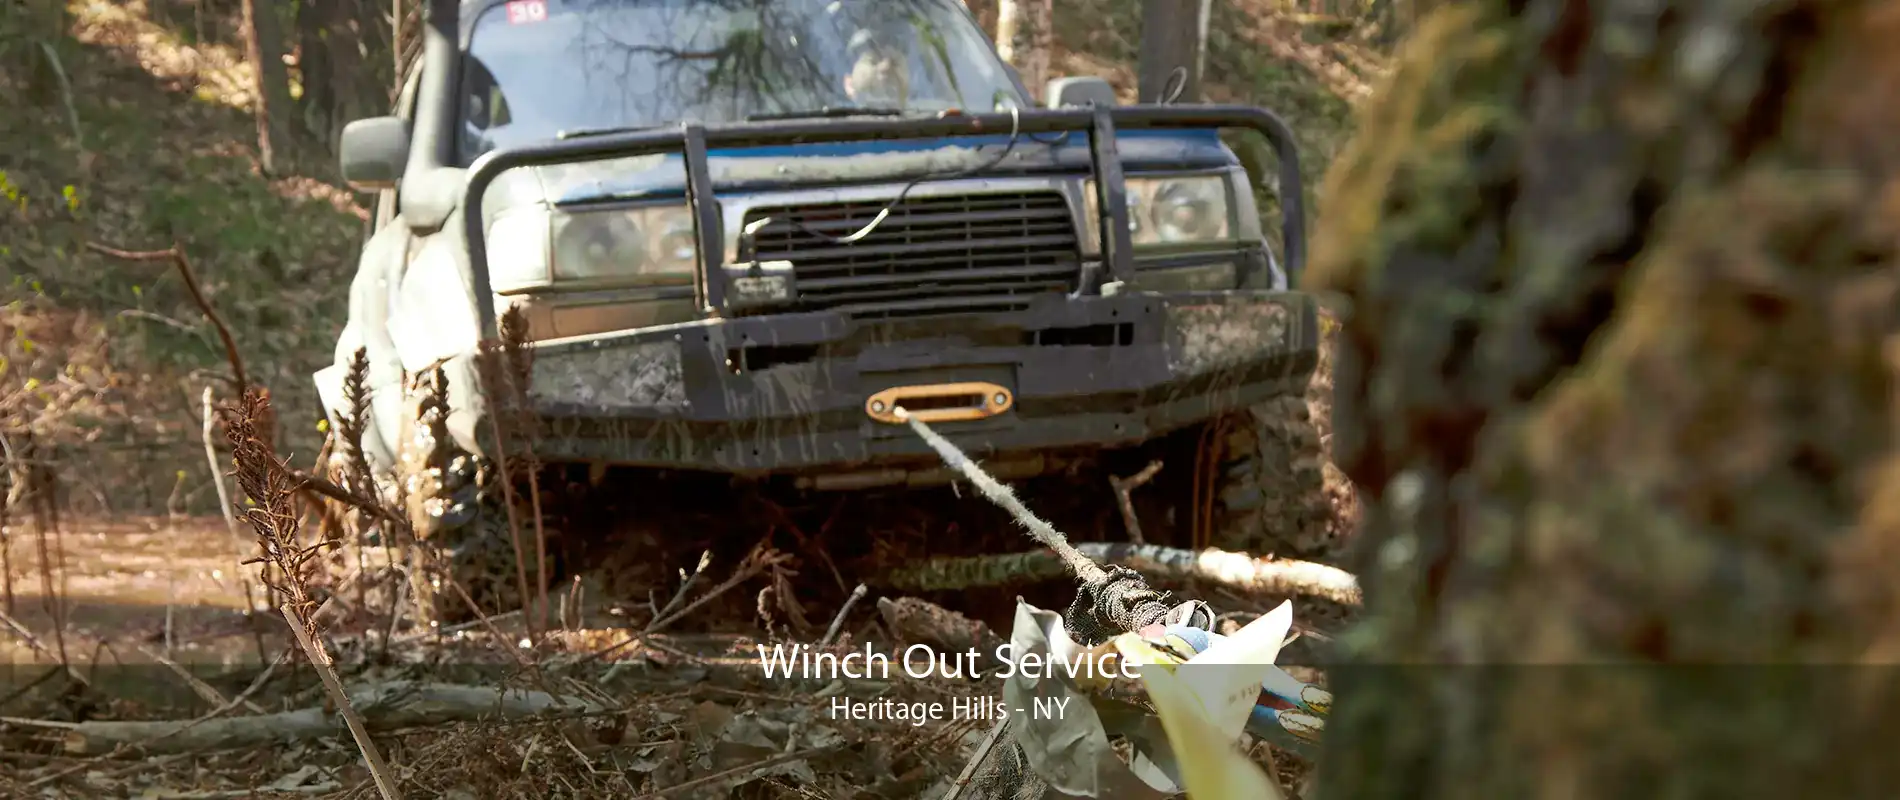 Winch Out Service Heritage Hills - NY